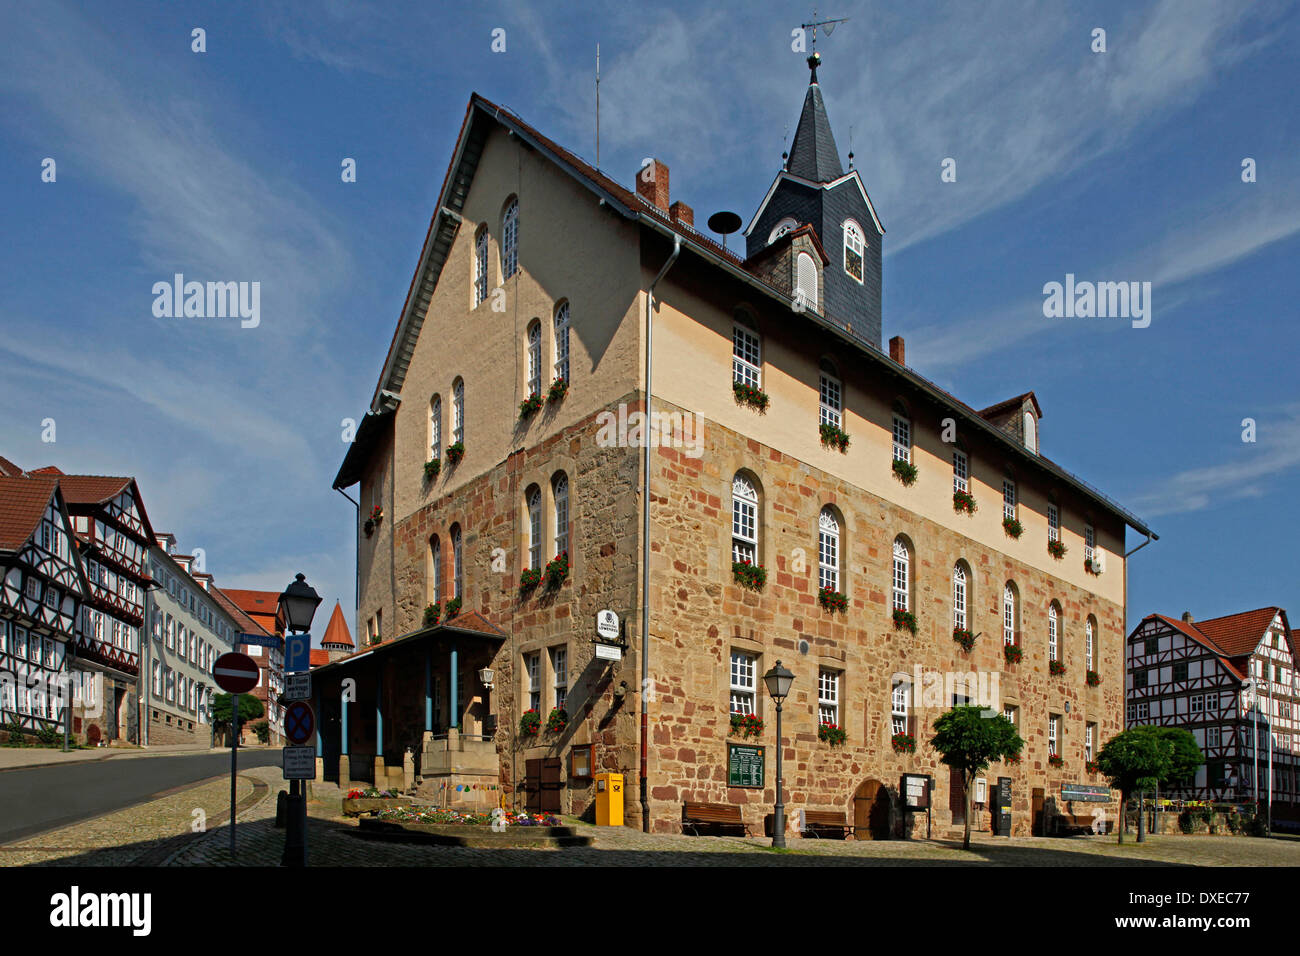 marketplace and town hall, Spangenberg,  Schwalm-Eder district, Hesse, Germany Stock Photo